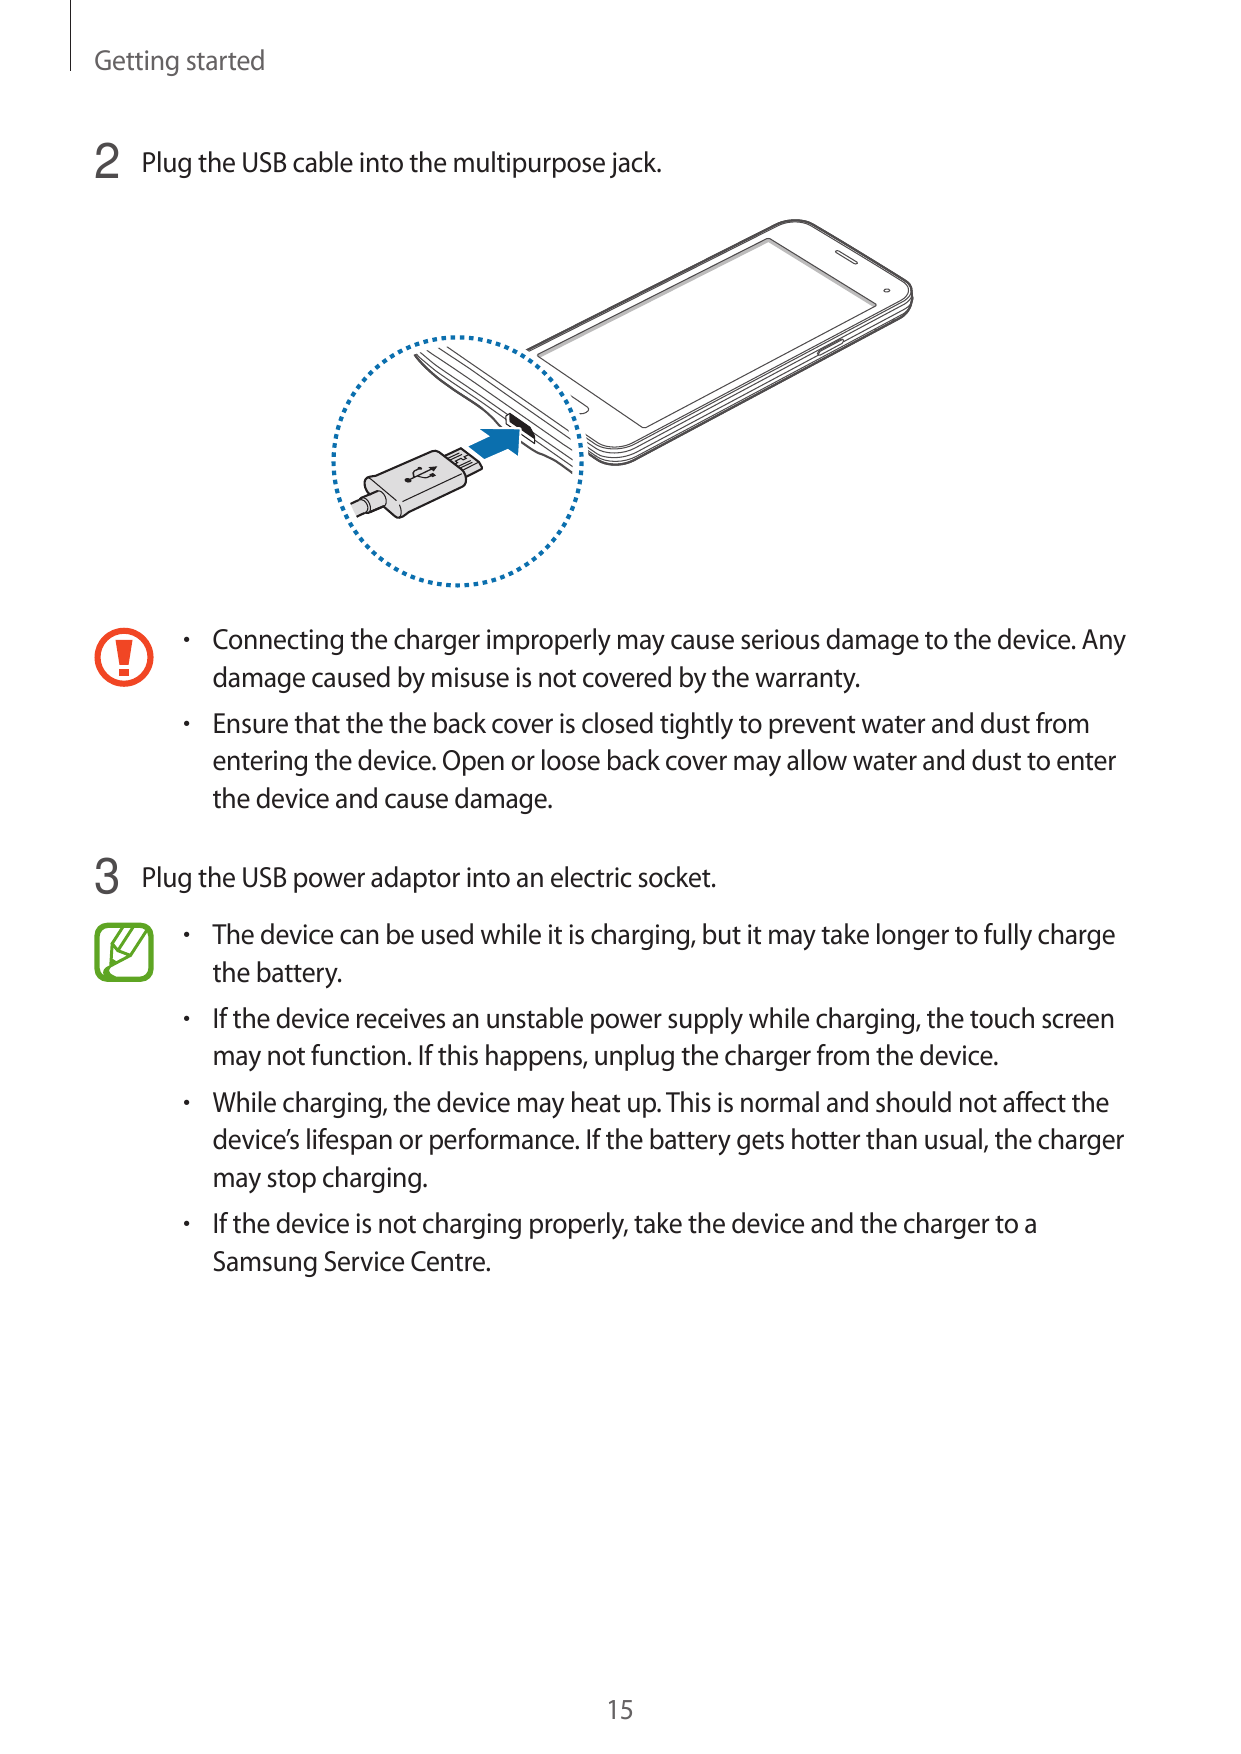 Getting started2 Plug the USB cable into the multipurpose jack.• Connecting the charger improperly may cause serious damage to t